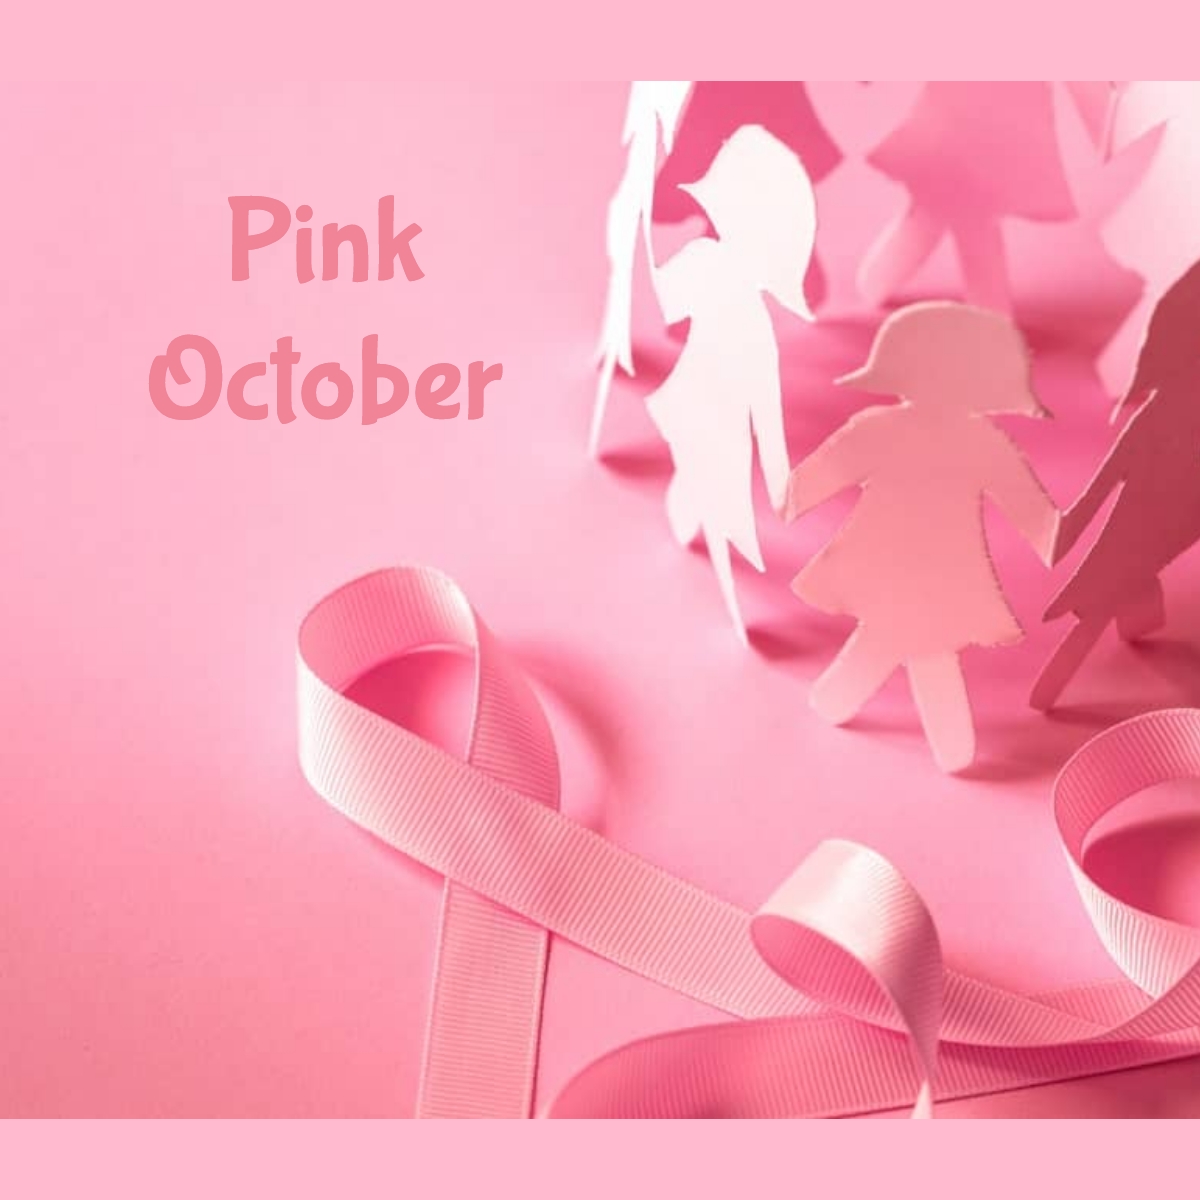 Pink October- Tuesday 25th October